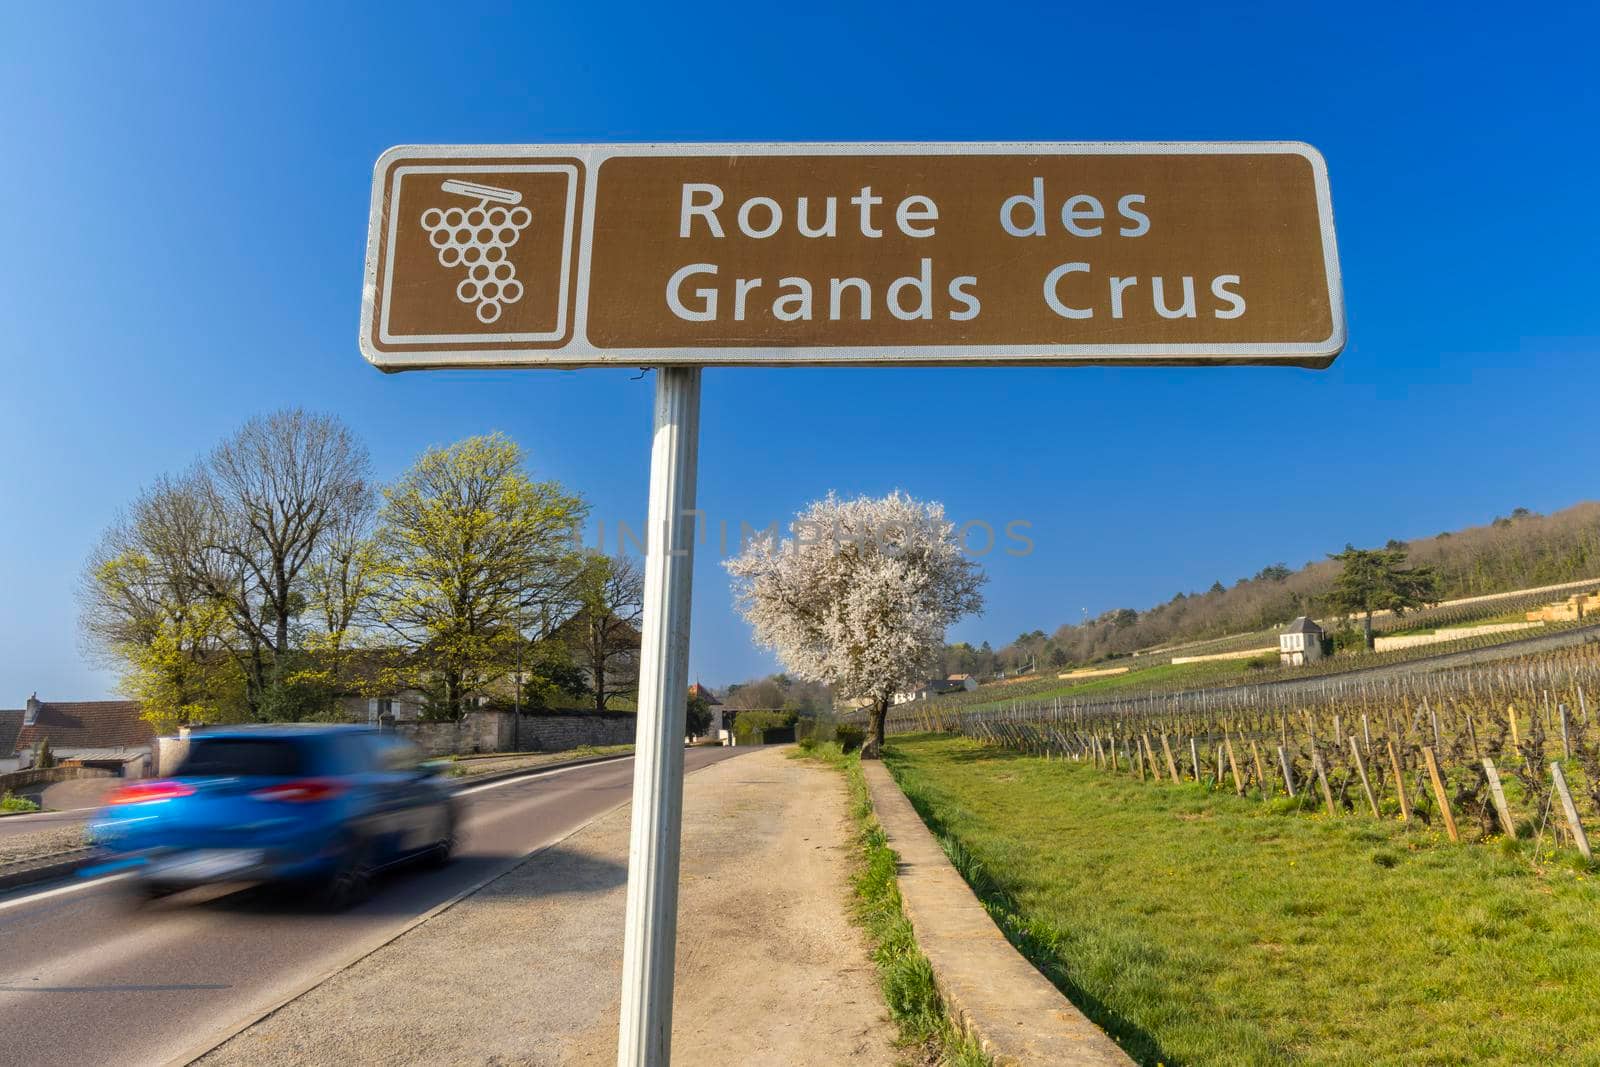 Wine road (Route des Grands Crus) near Beaune, Burgundy, France by phbcz